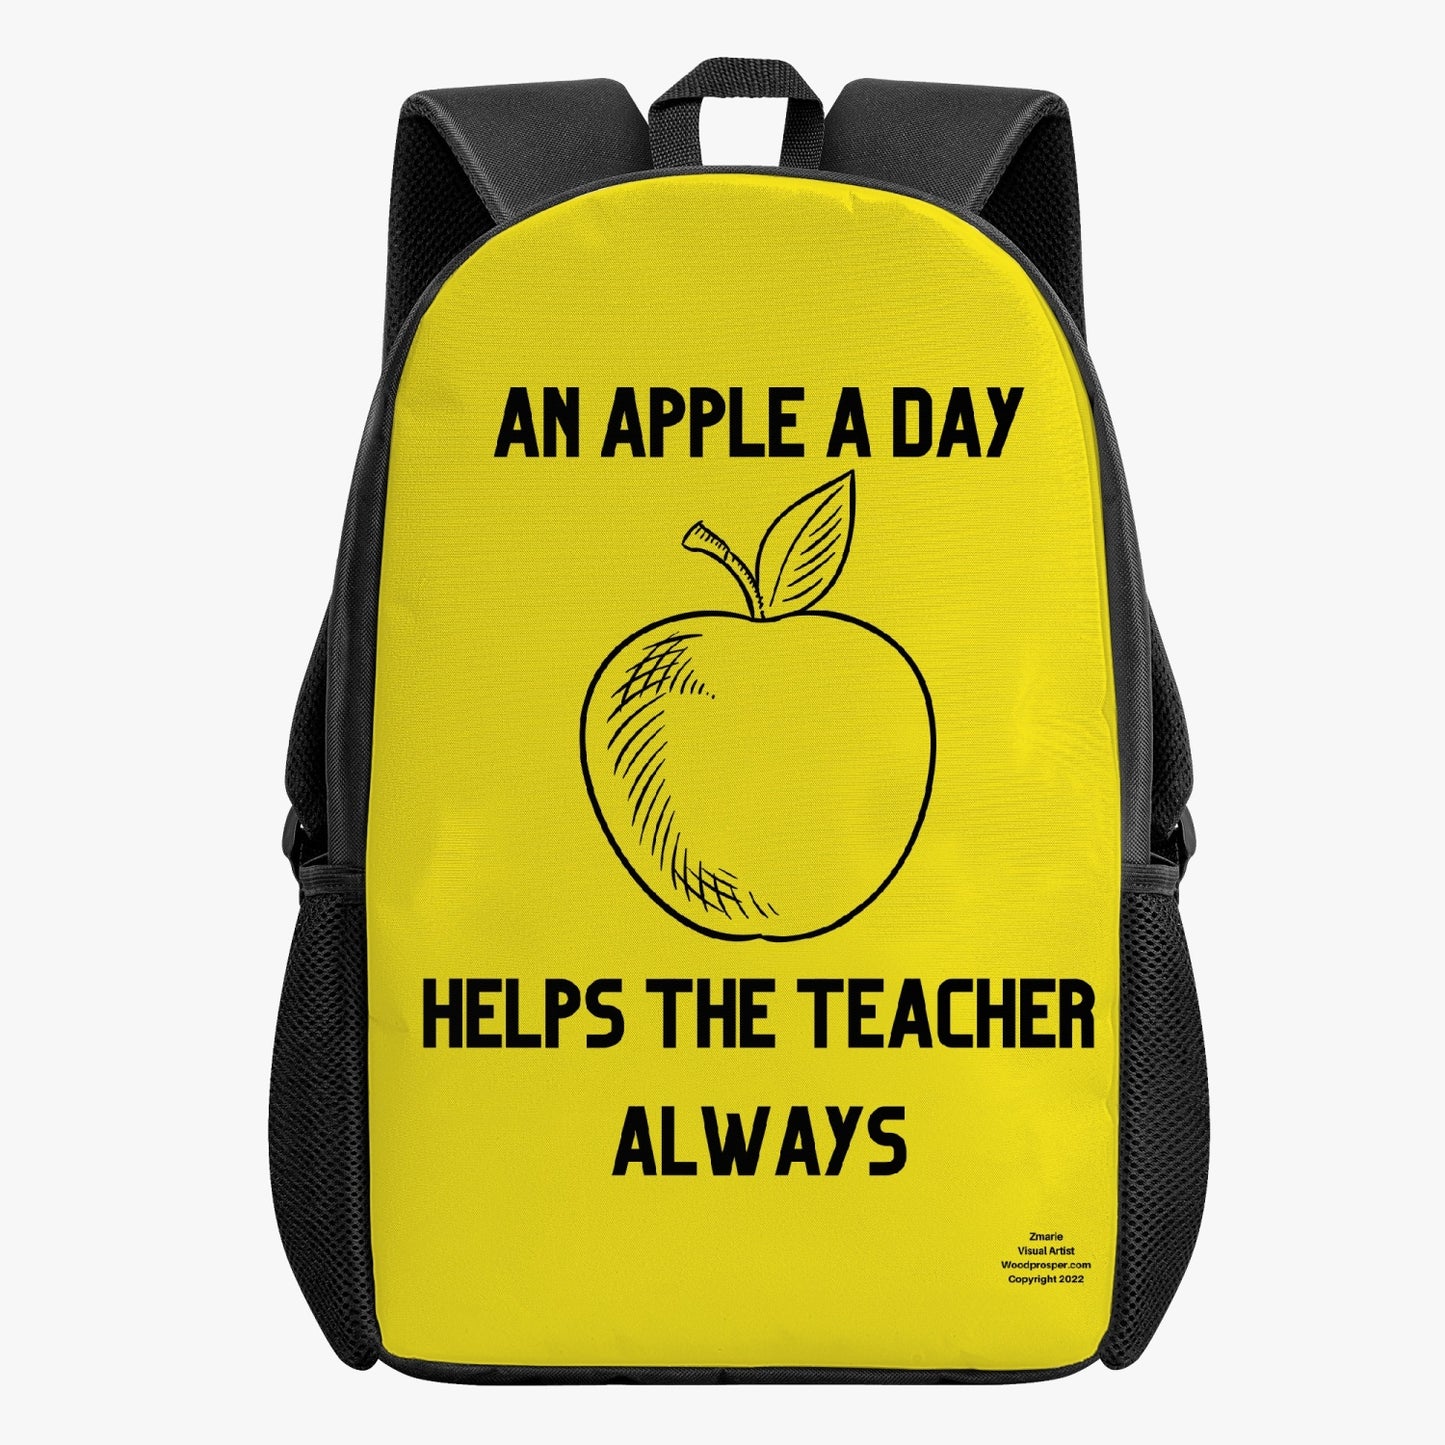 An Apple A Day Kid's School Backpack (Yellow)